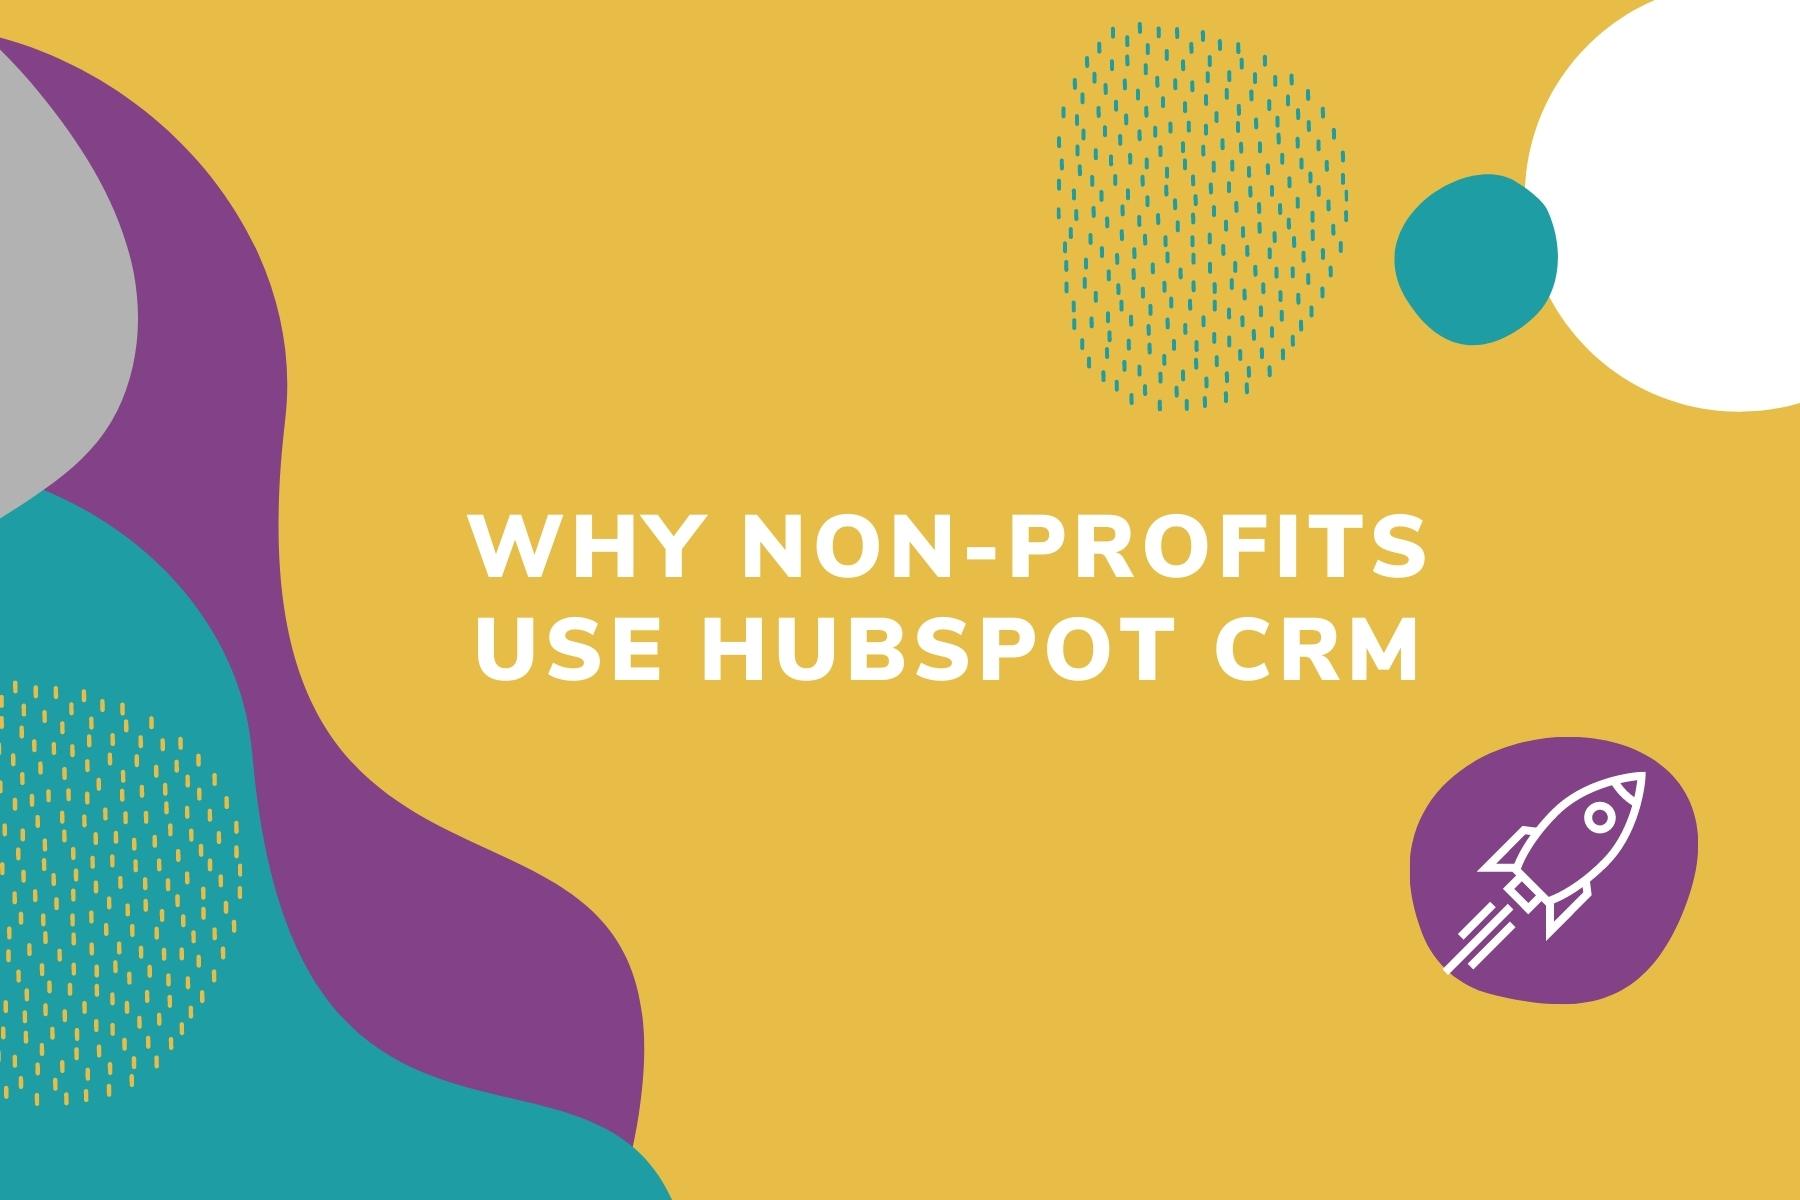 Why non-profits use HubSpot CRM